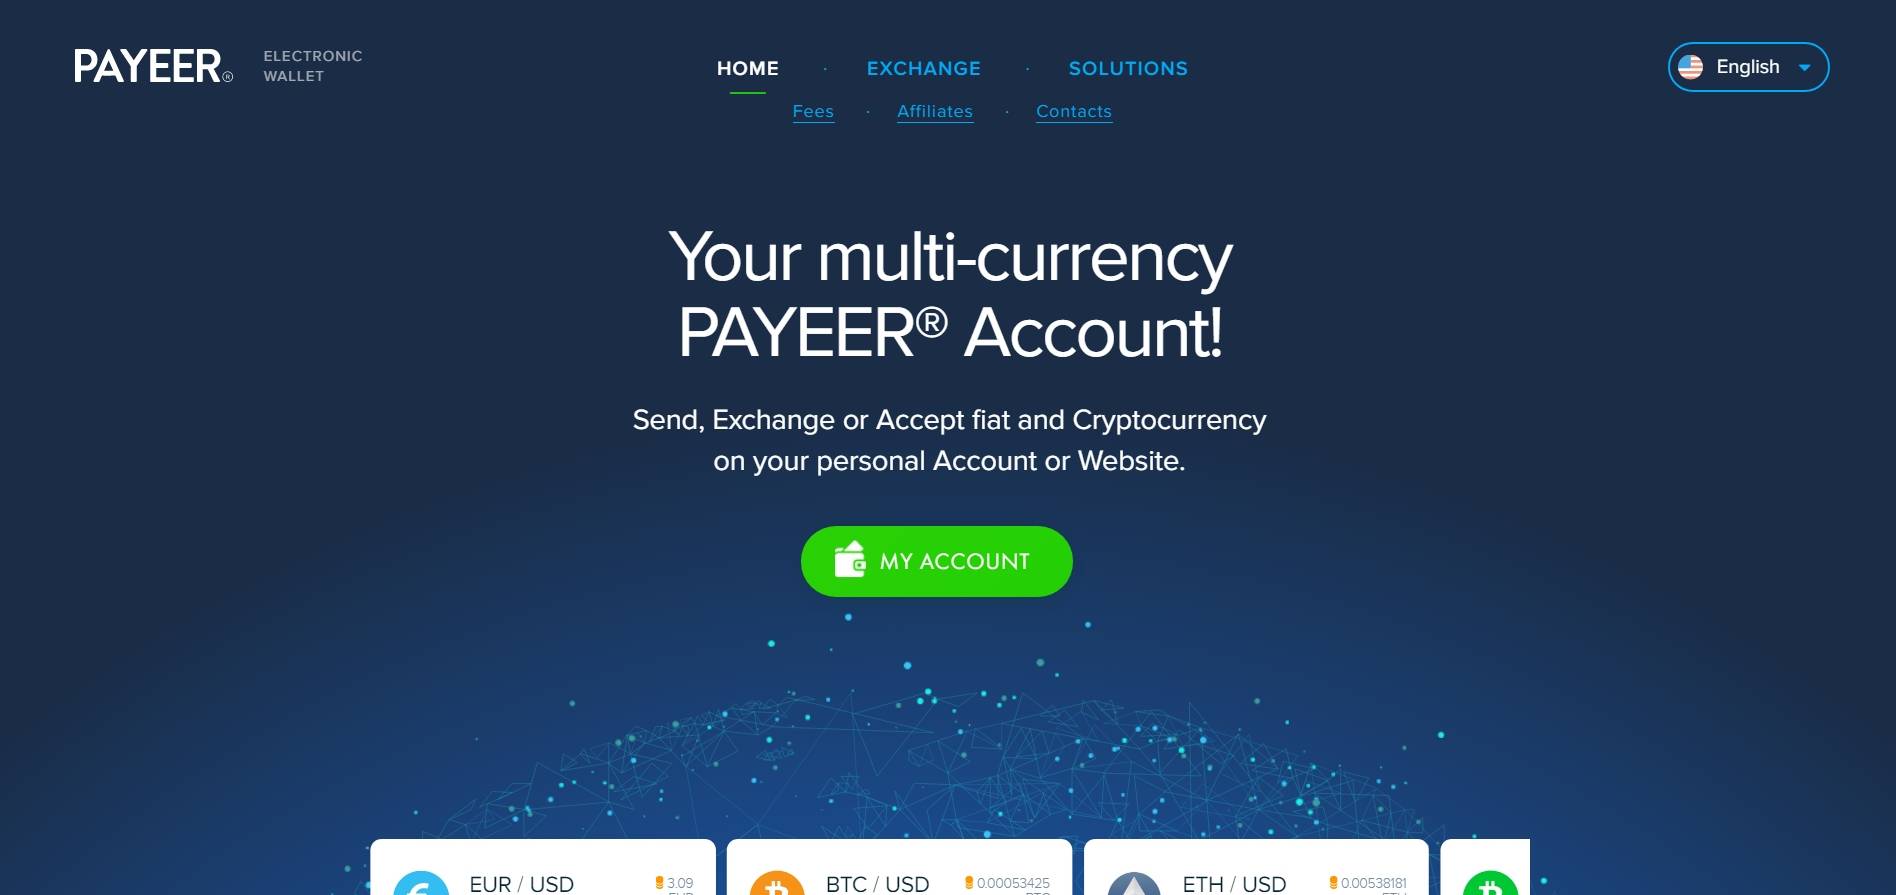 BTC / USDT - current exchange rate Bitcoin / Tether today | PAYEER